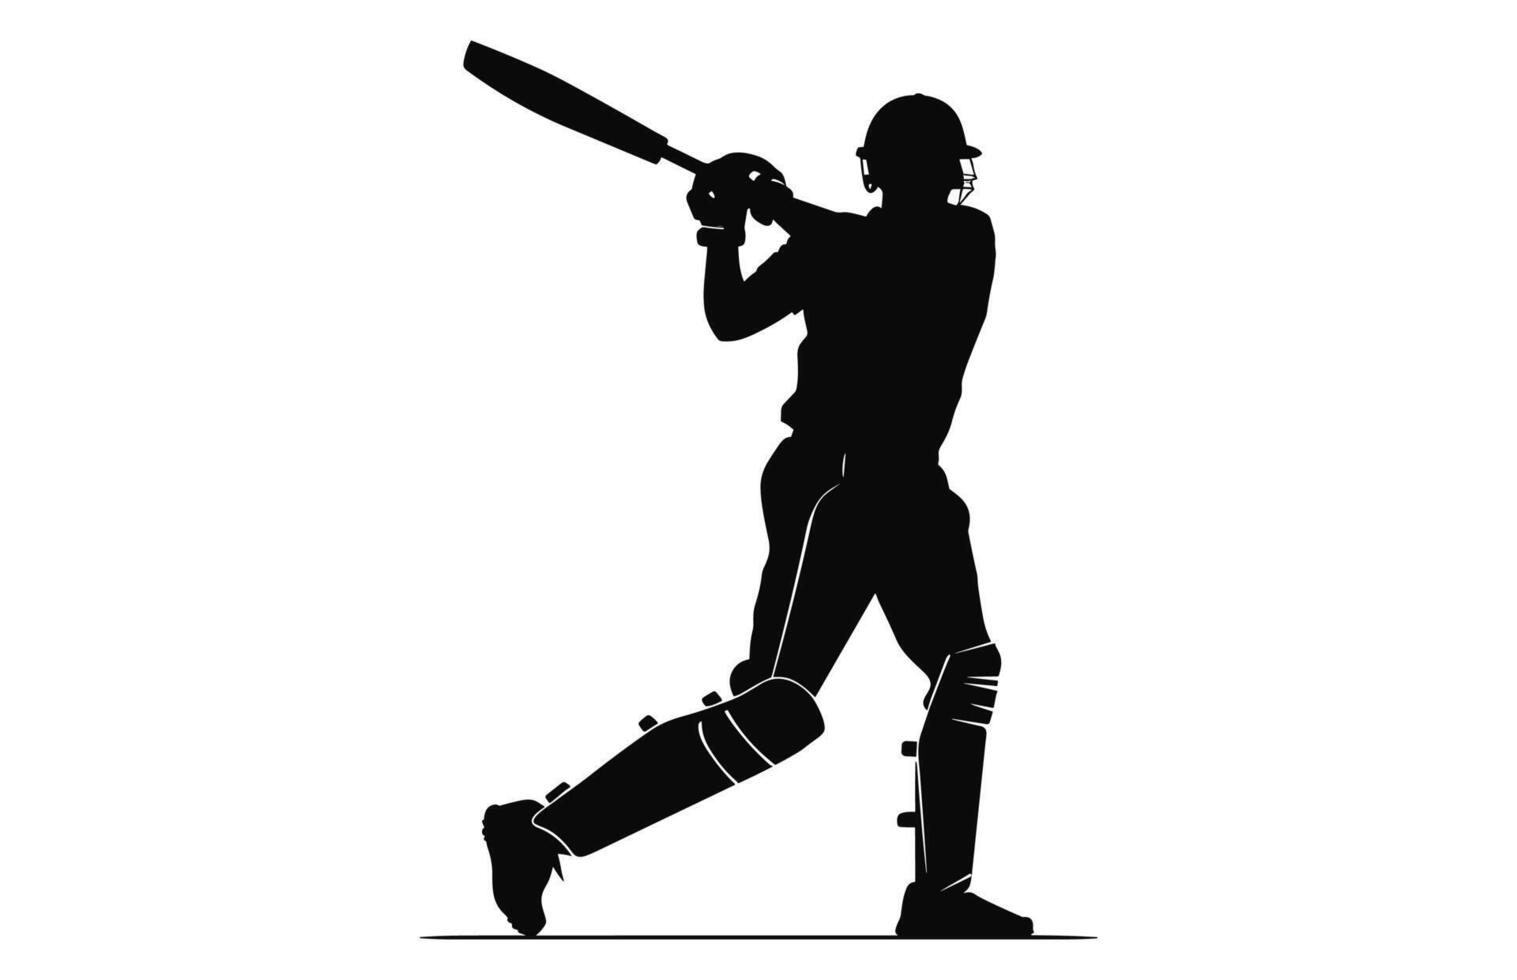 A batsman Silhouette Clipart isolated on a white background, Cricket player batting black Vector